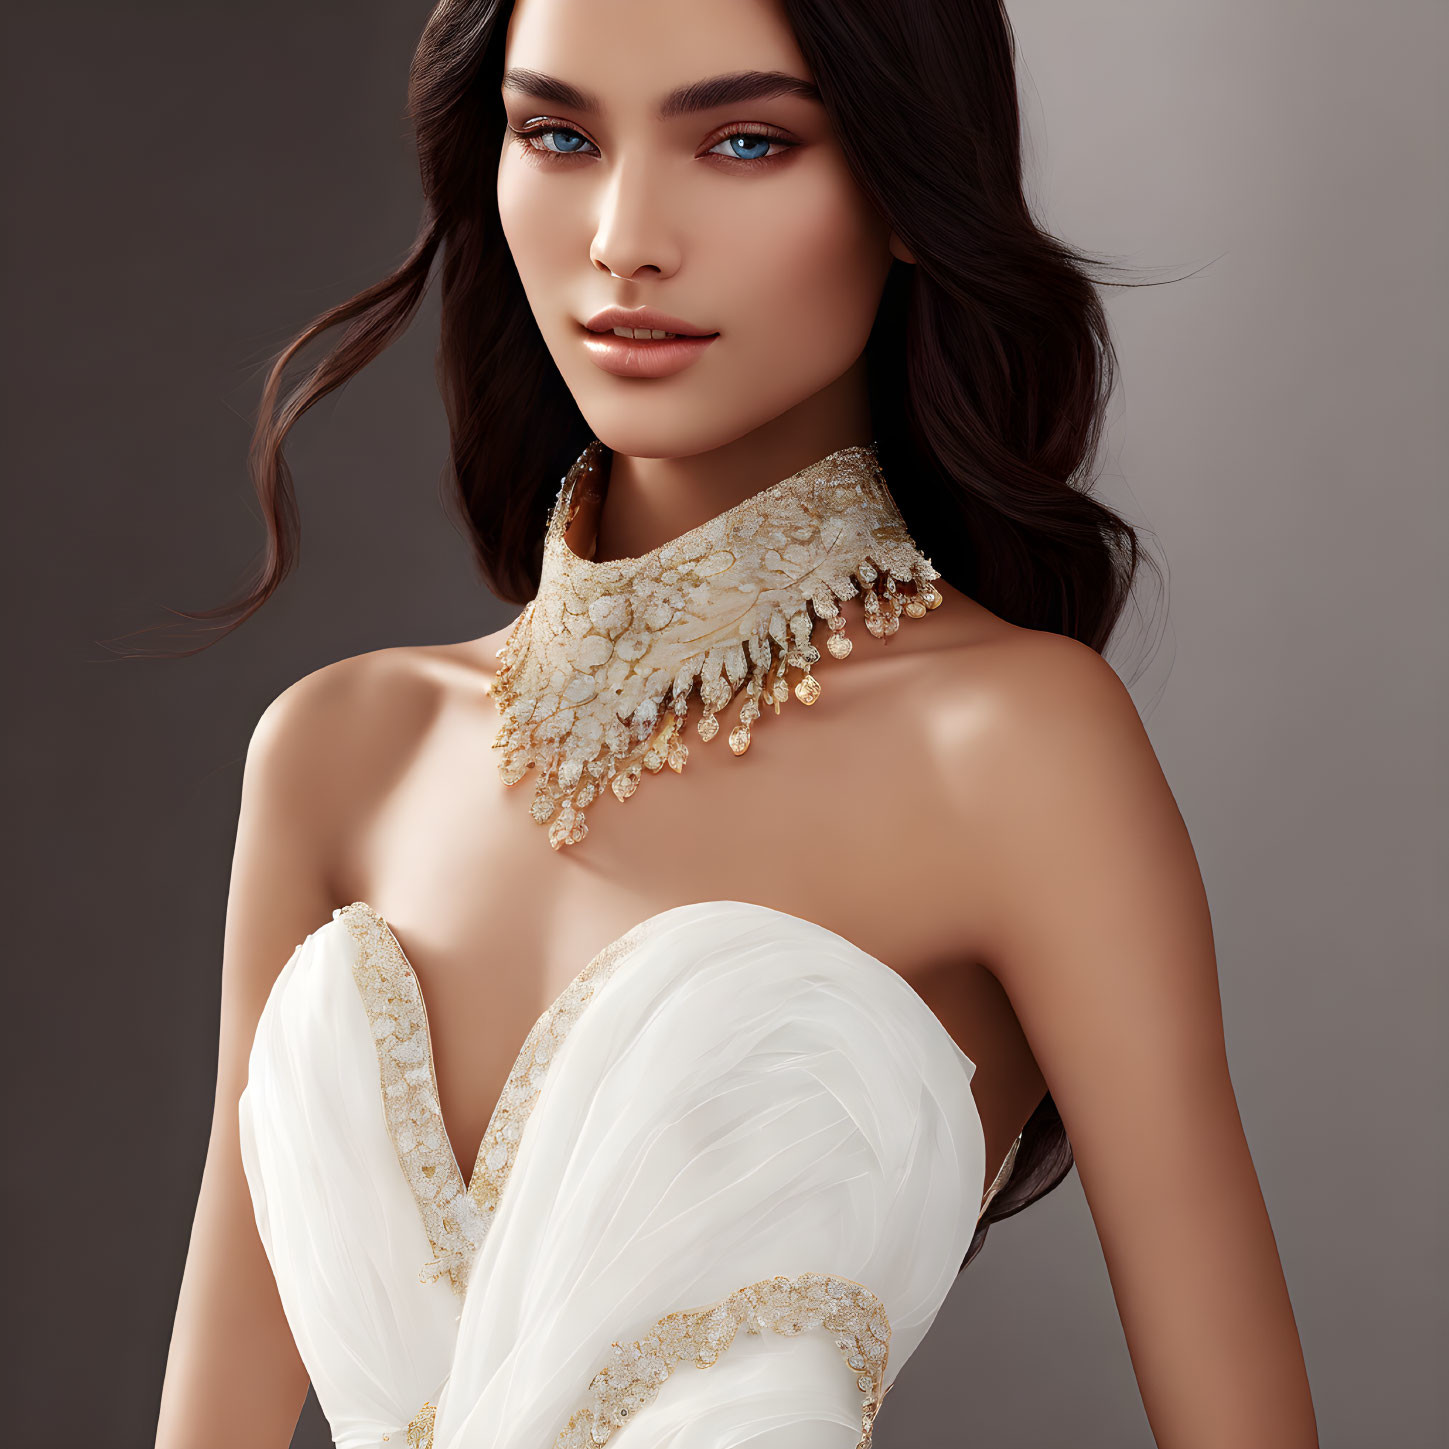 Portrait of woman with blue eyes in white gown & gold necklace